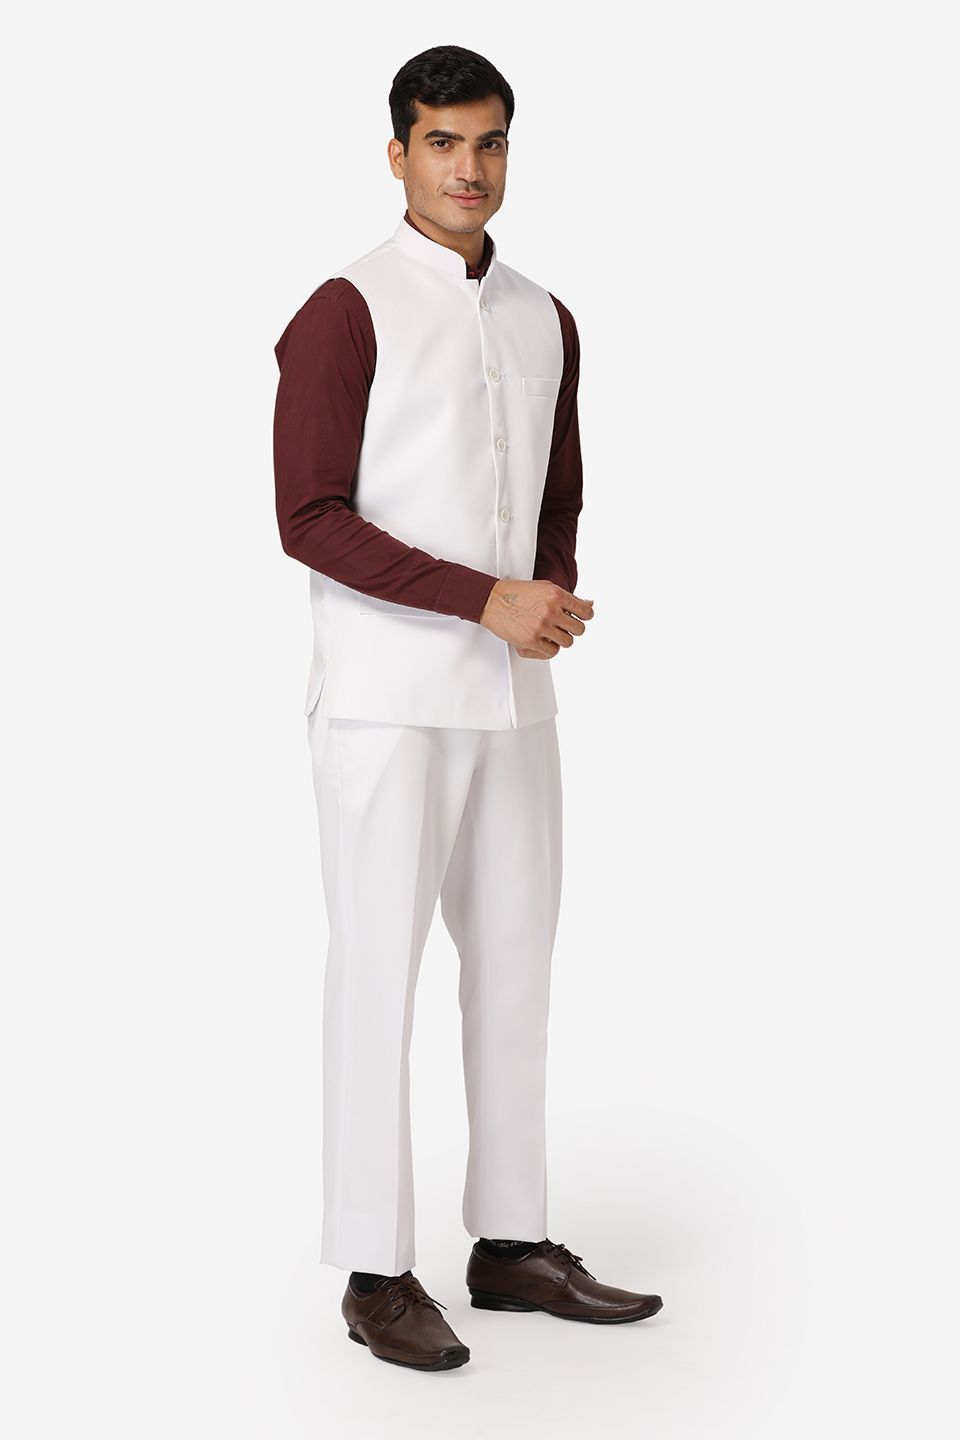 WINTAGE Men's Poly Cotton Casual and Evening Vest & Pant Set : White